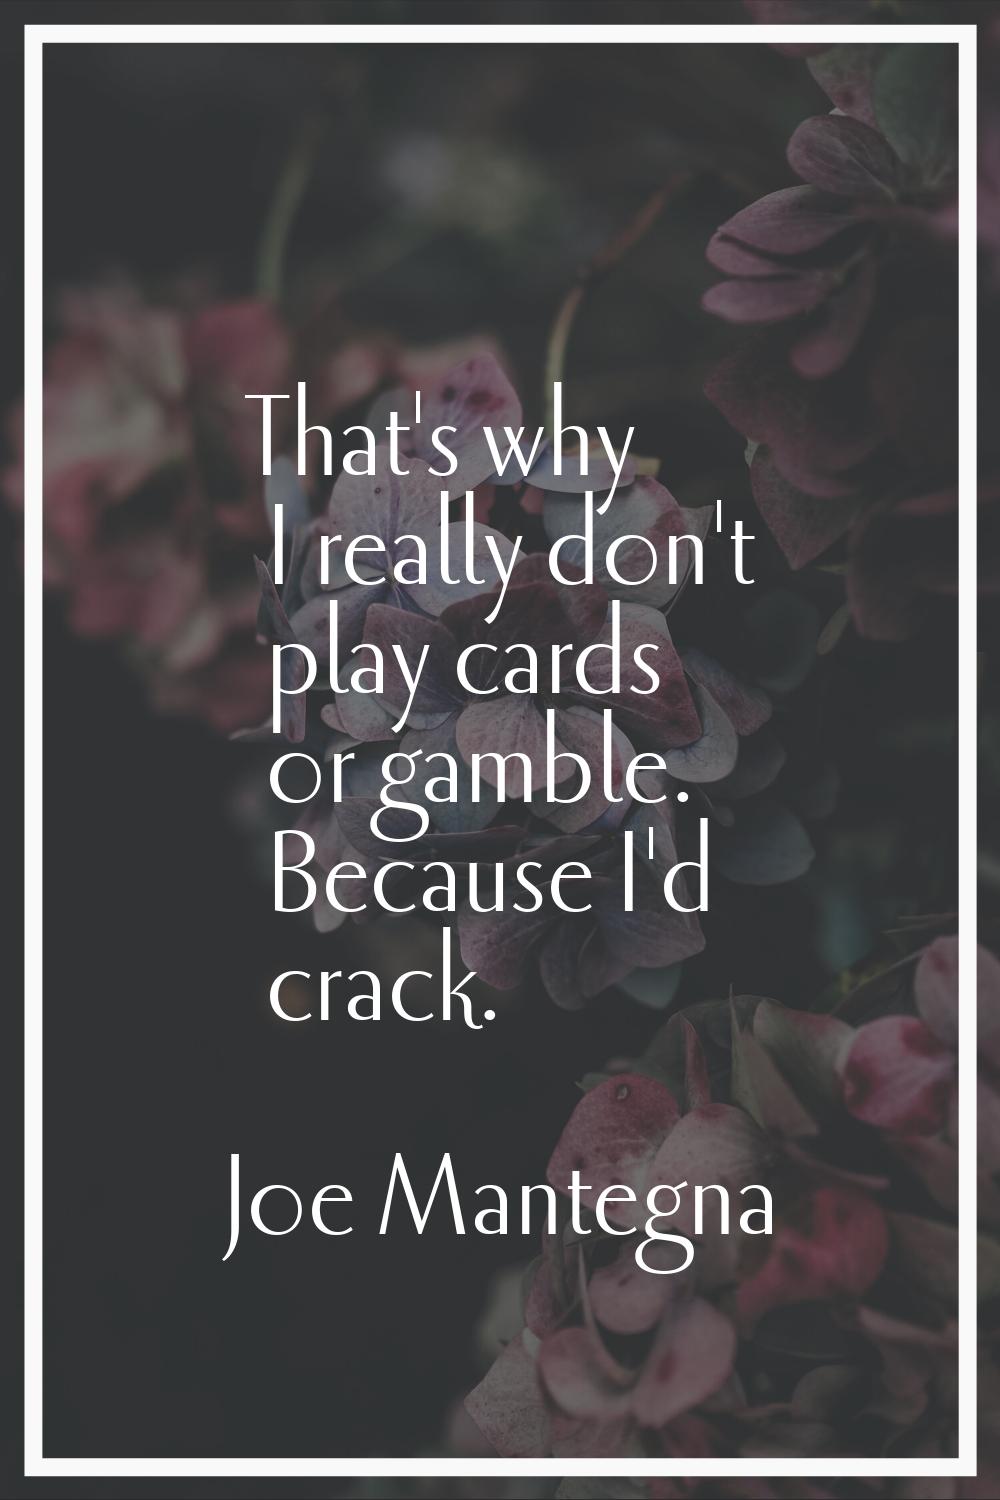 That's why I really don't play cards or gamble. Because I'd crack.